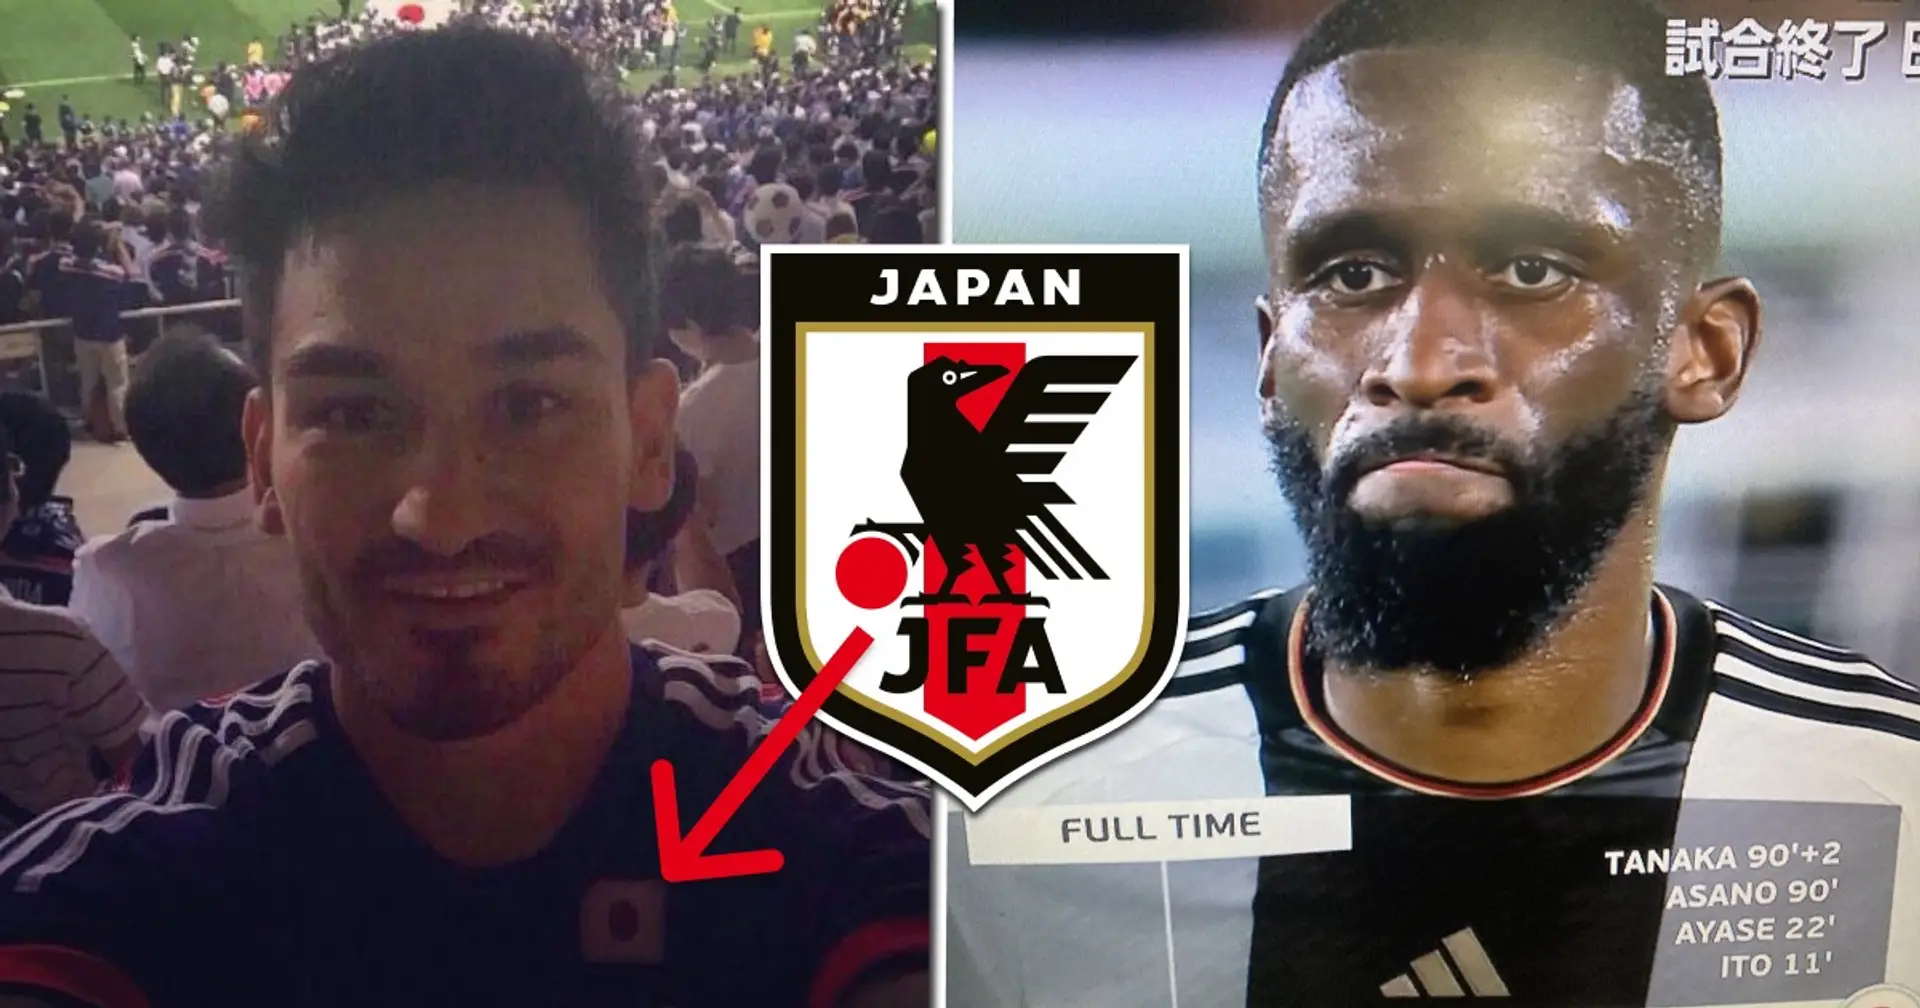 Why is photo of Gundogan in Japan shirt trending after Japan beats Germany 4-1? Explained